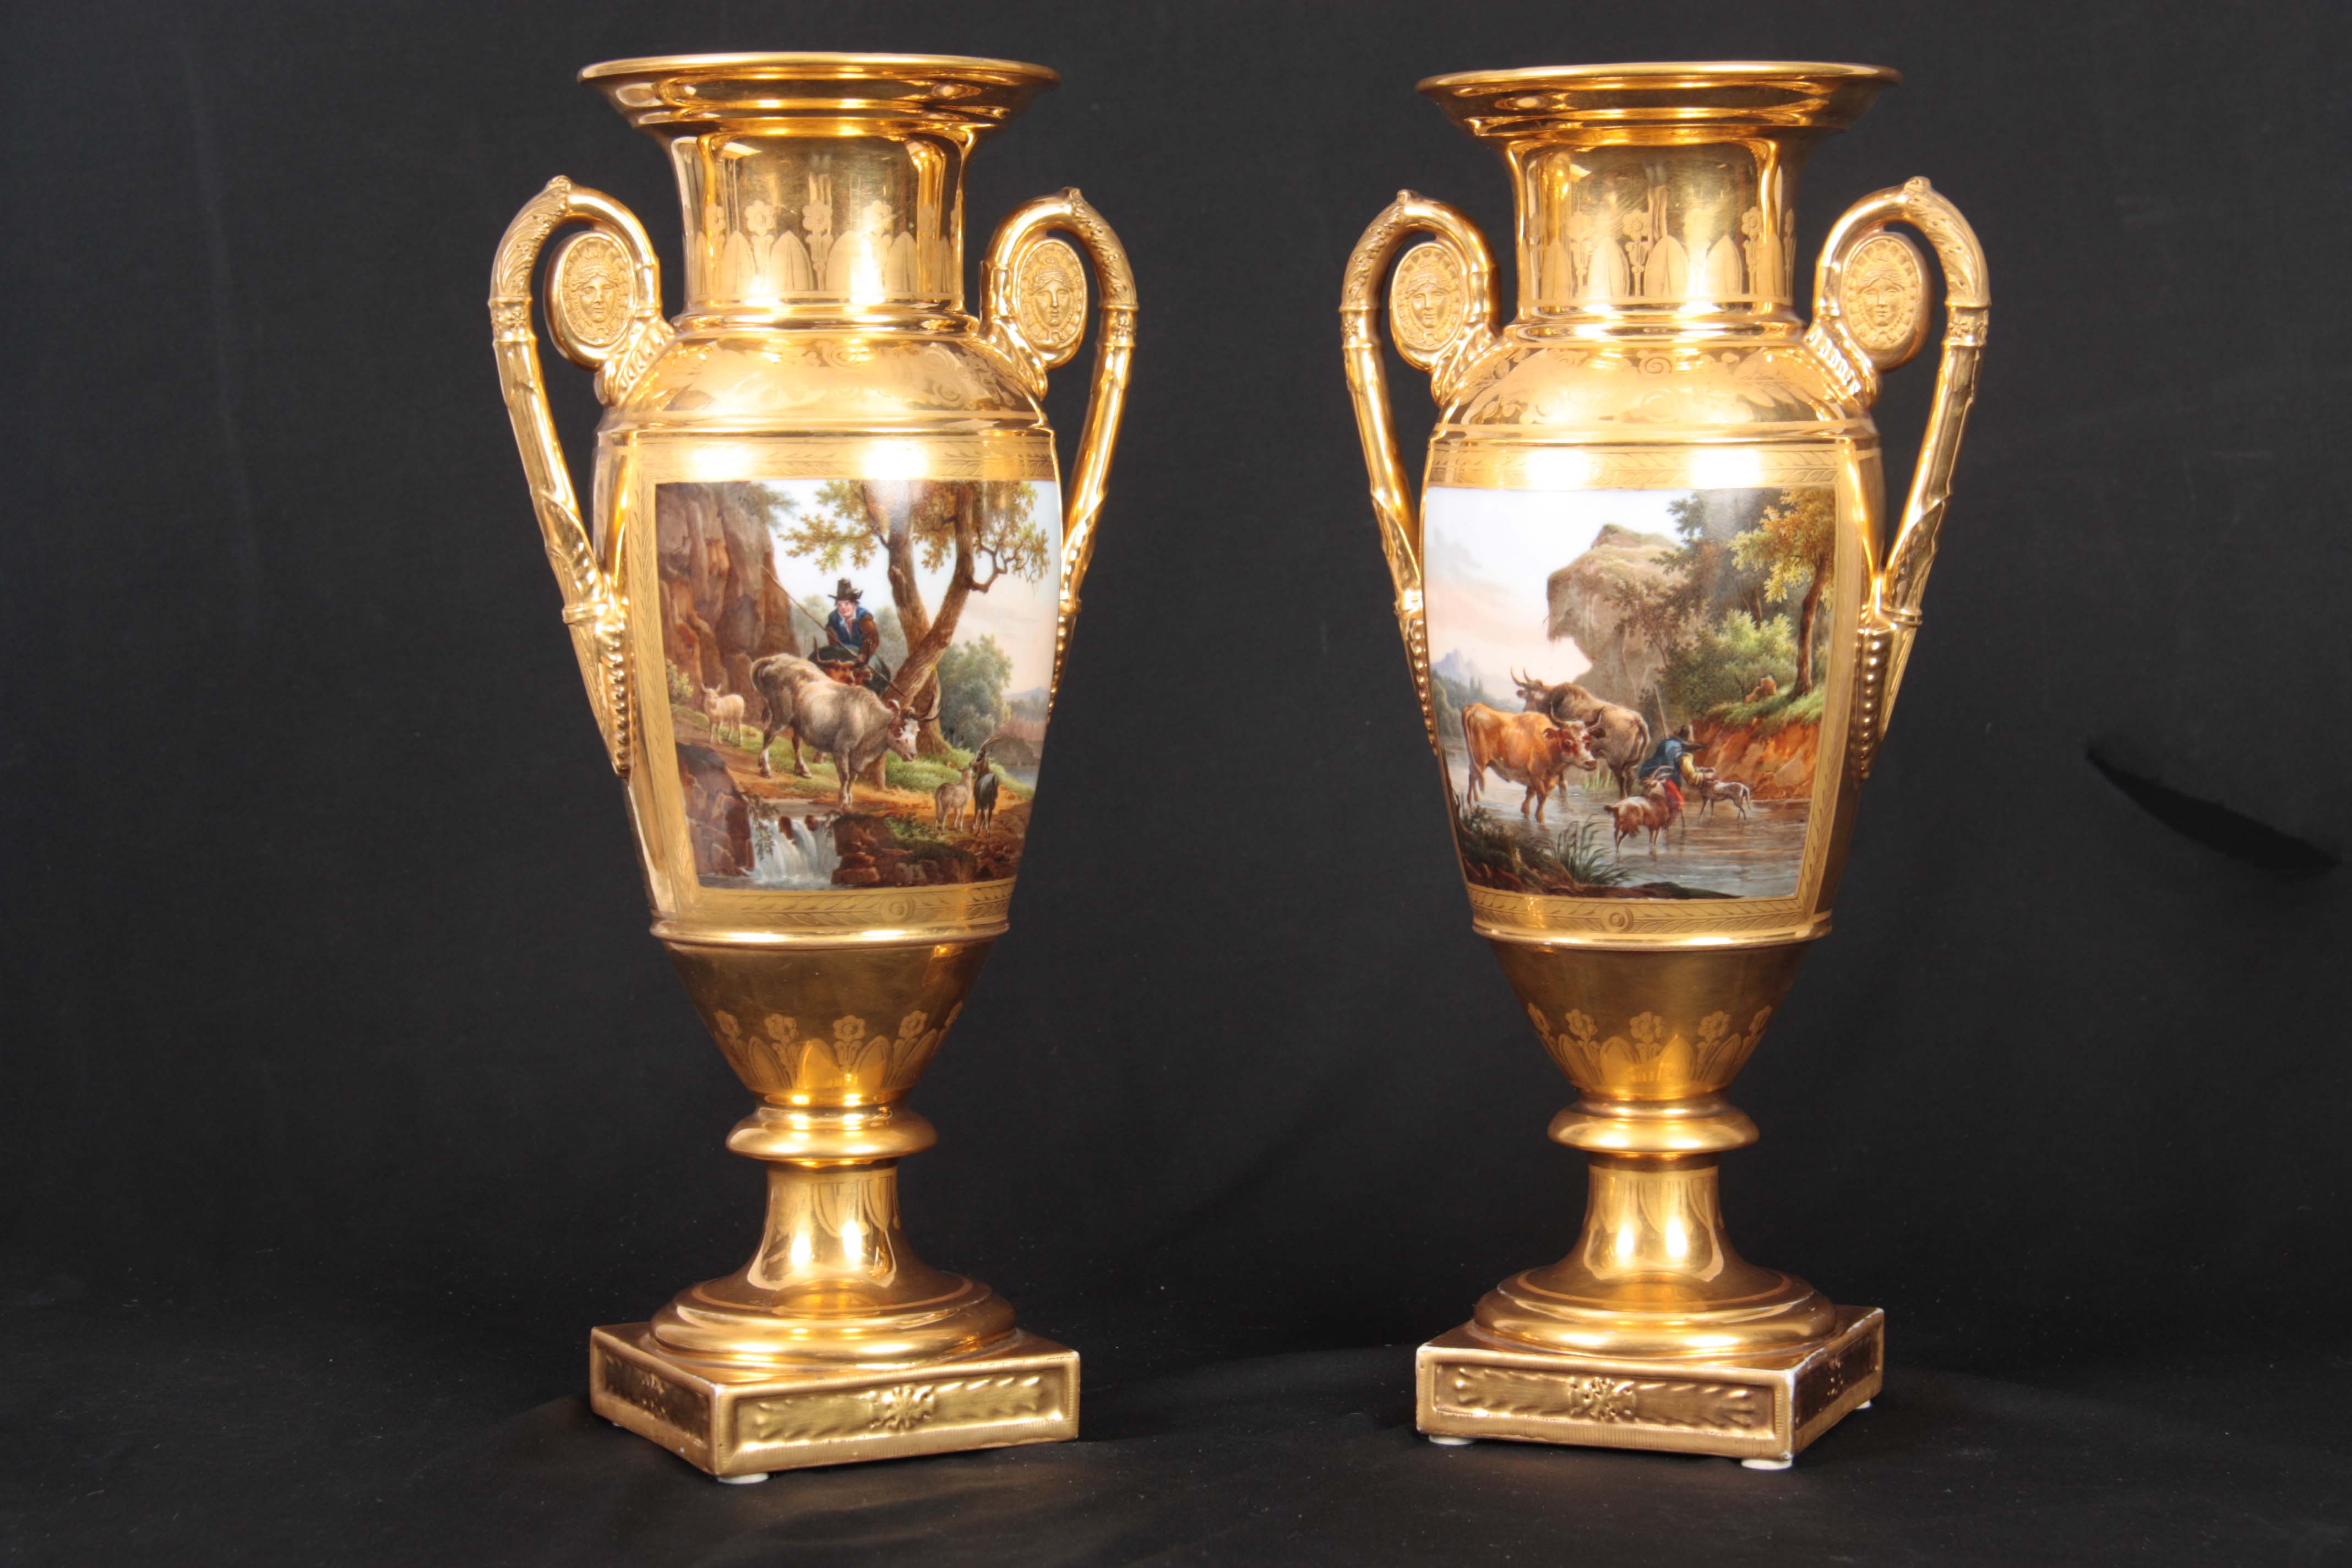 A PAIR OF EARLY 19TH CENTURY FRENCH EMPIRE PORCELAIN VASES of classical urn-shape with medallion-set - Image 7 of 12